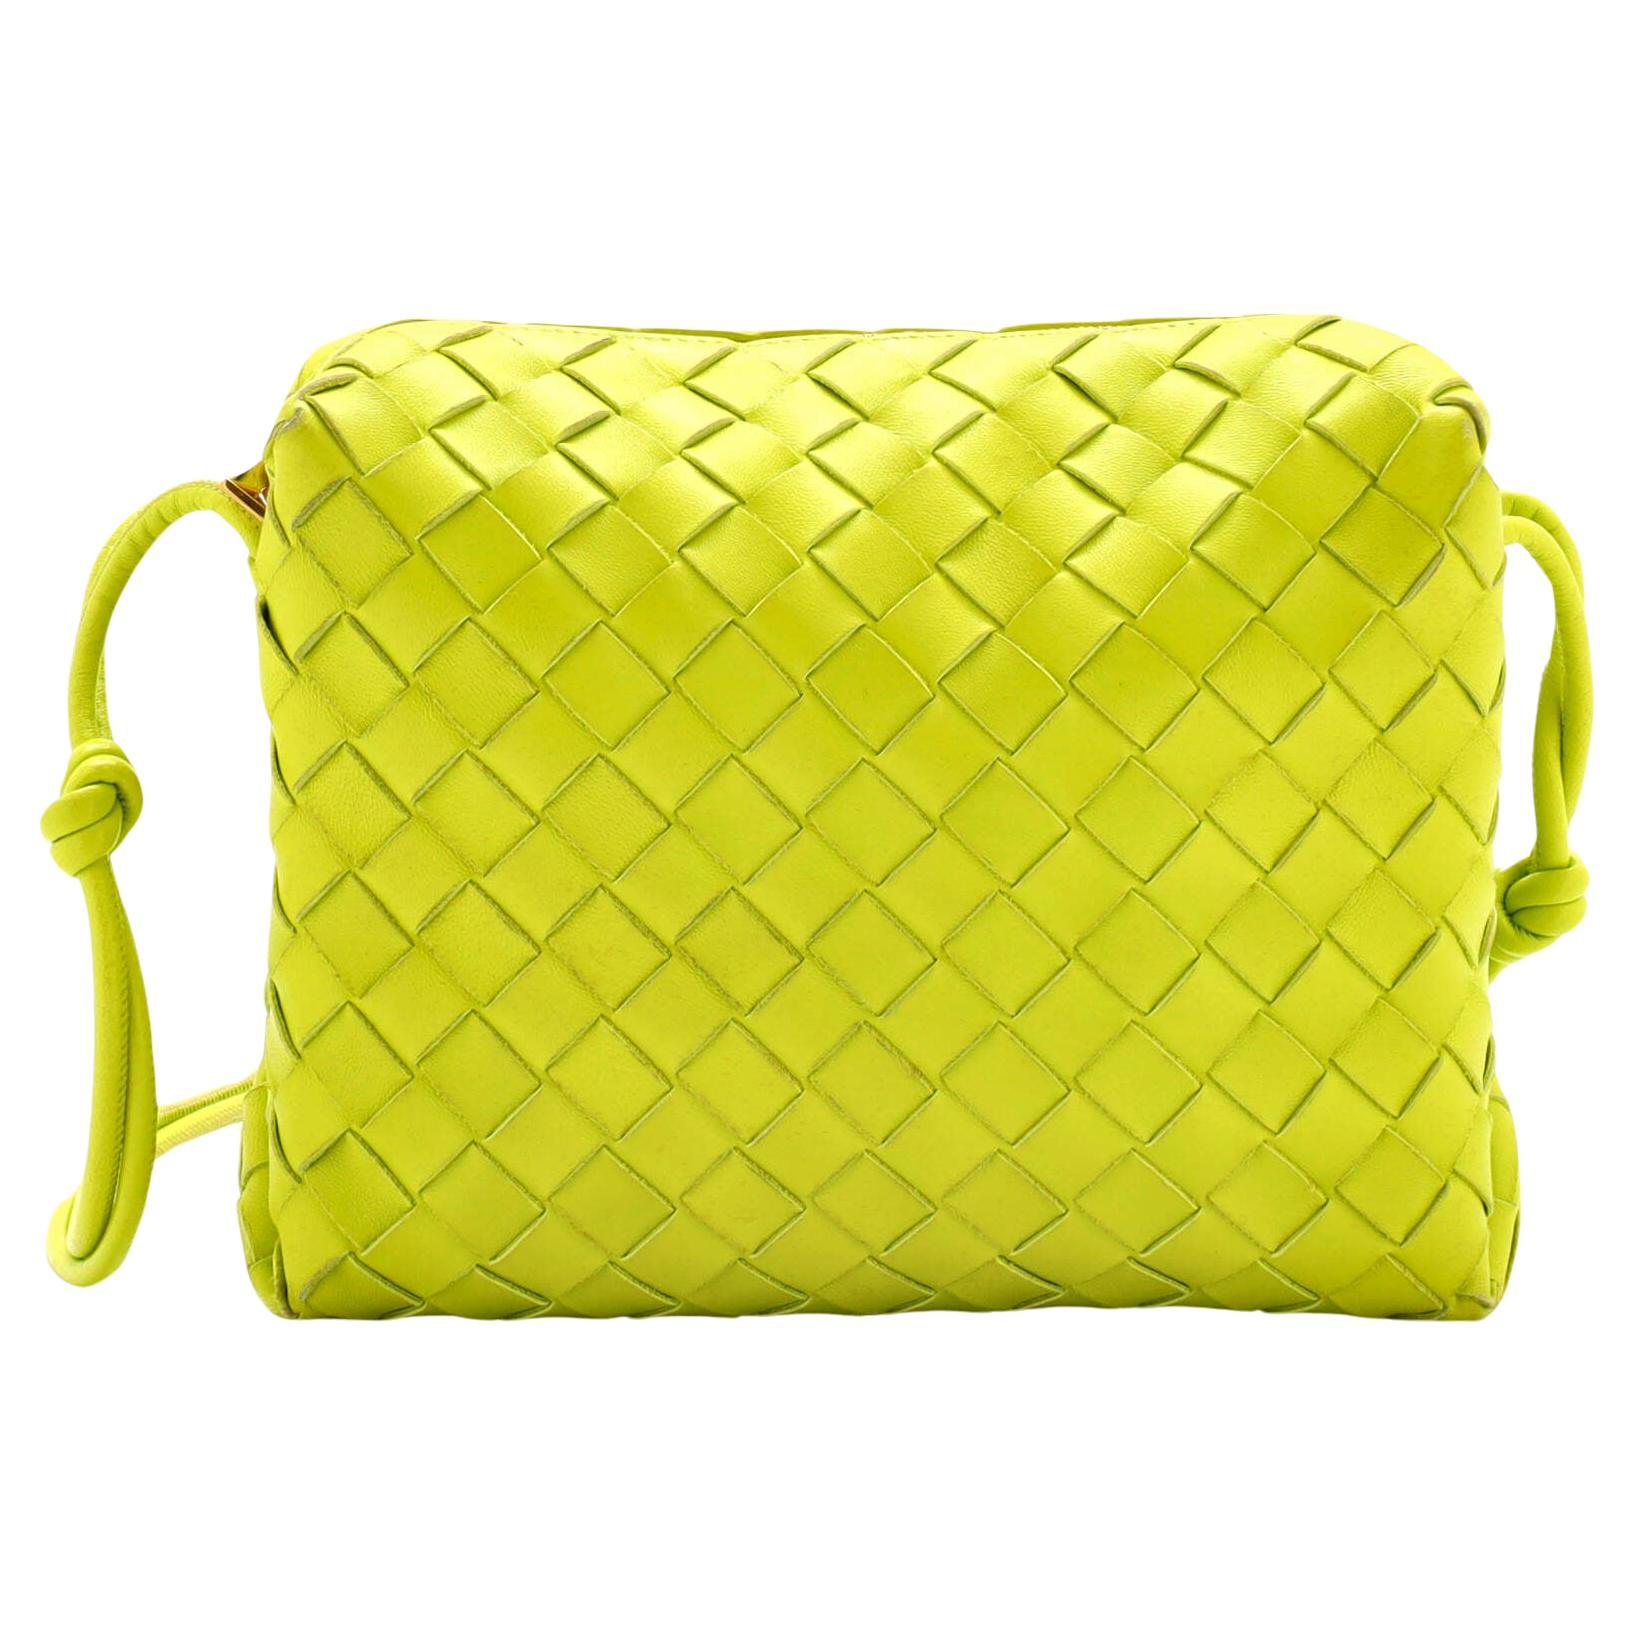 JAYLEY Yellow Jodie Small Woven Shoulder Bag with Knot Detail Size: on